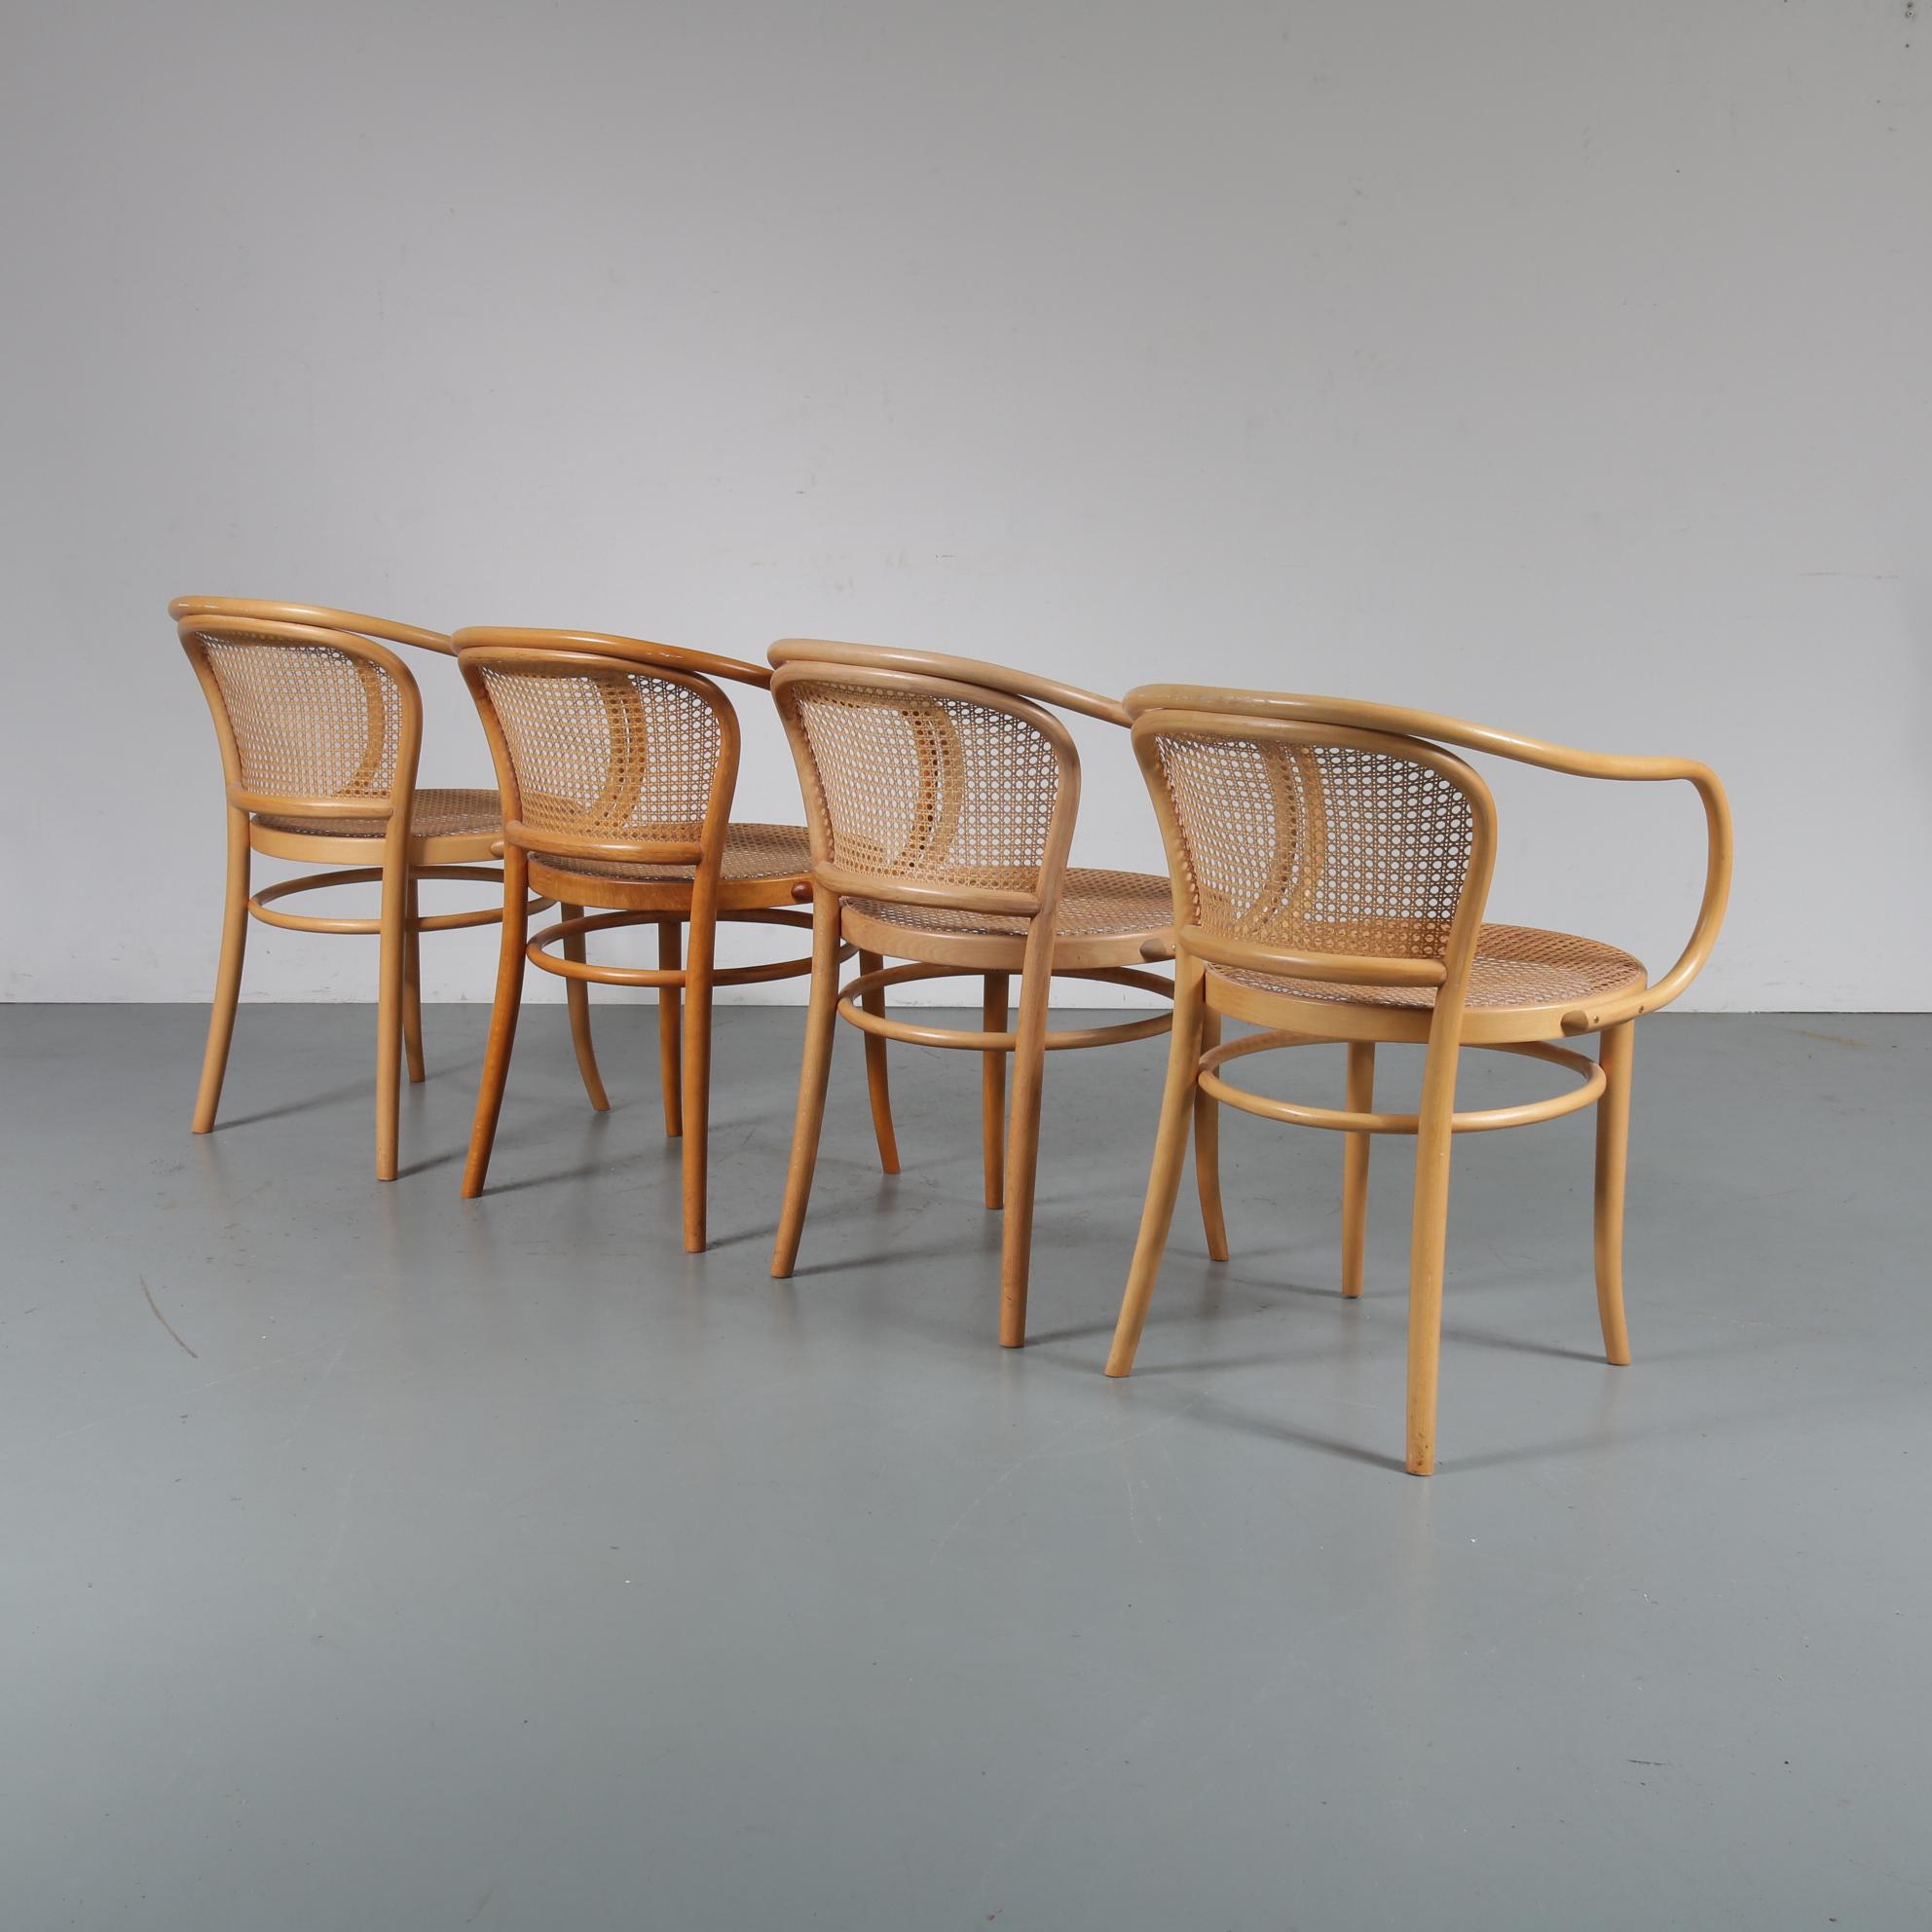 Rush Set of Four Corbusier Armchairs by Michael Thonet, Germany 1920